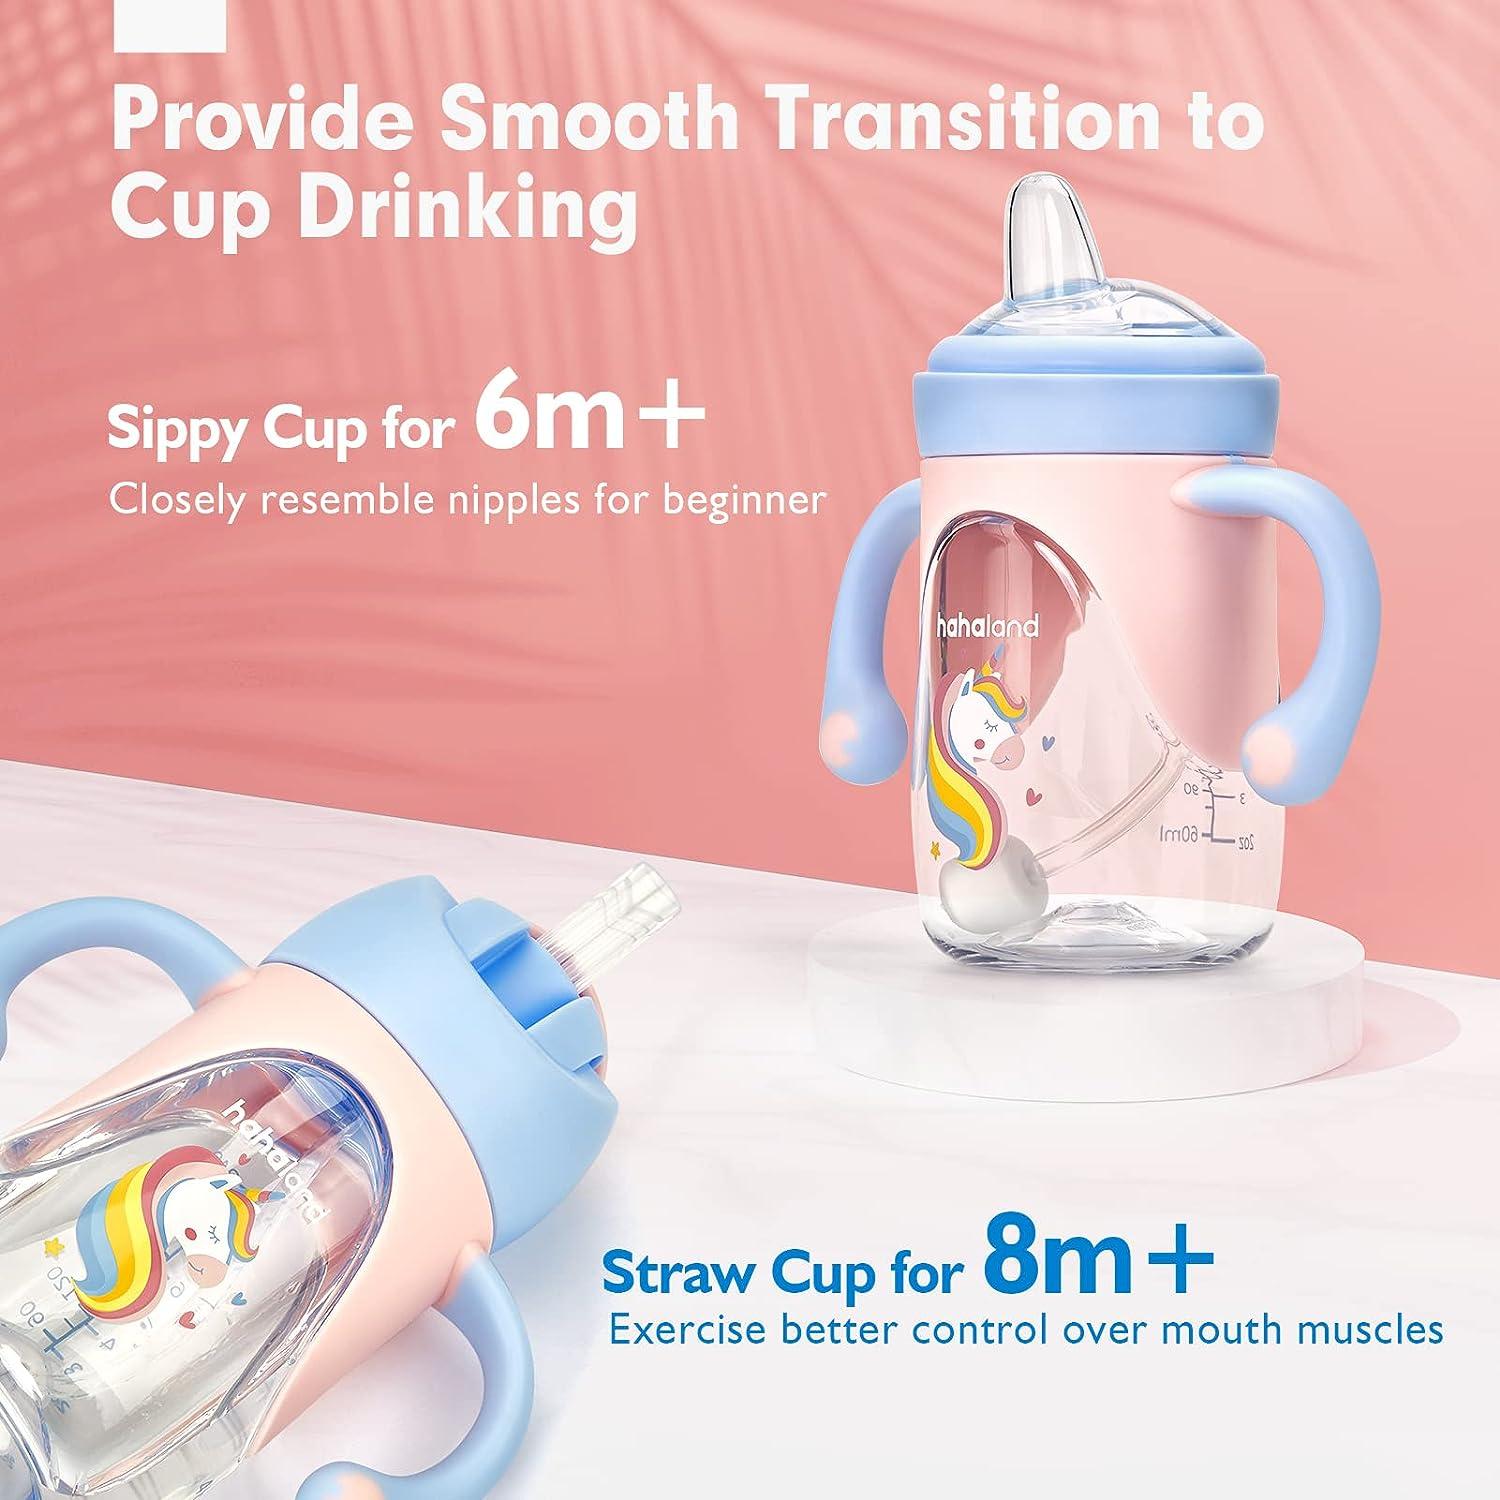 Sippy Cups For 1+ Year Old Unicorn Toddler Cups 2 In 1 With Spout & Straw,  Spill-proof Sippy Cup Learner Cup Toddler Transition Sippy Cups For